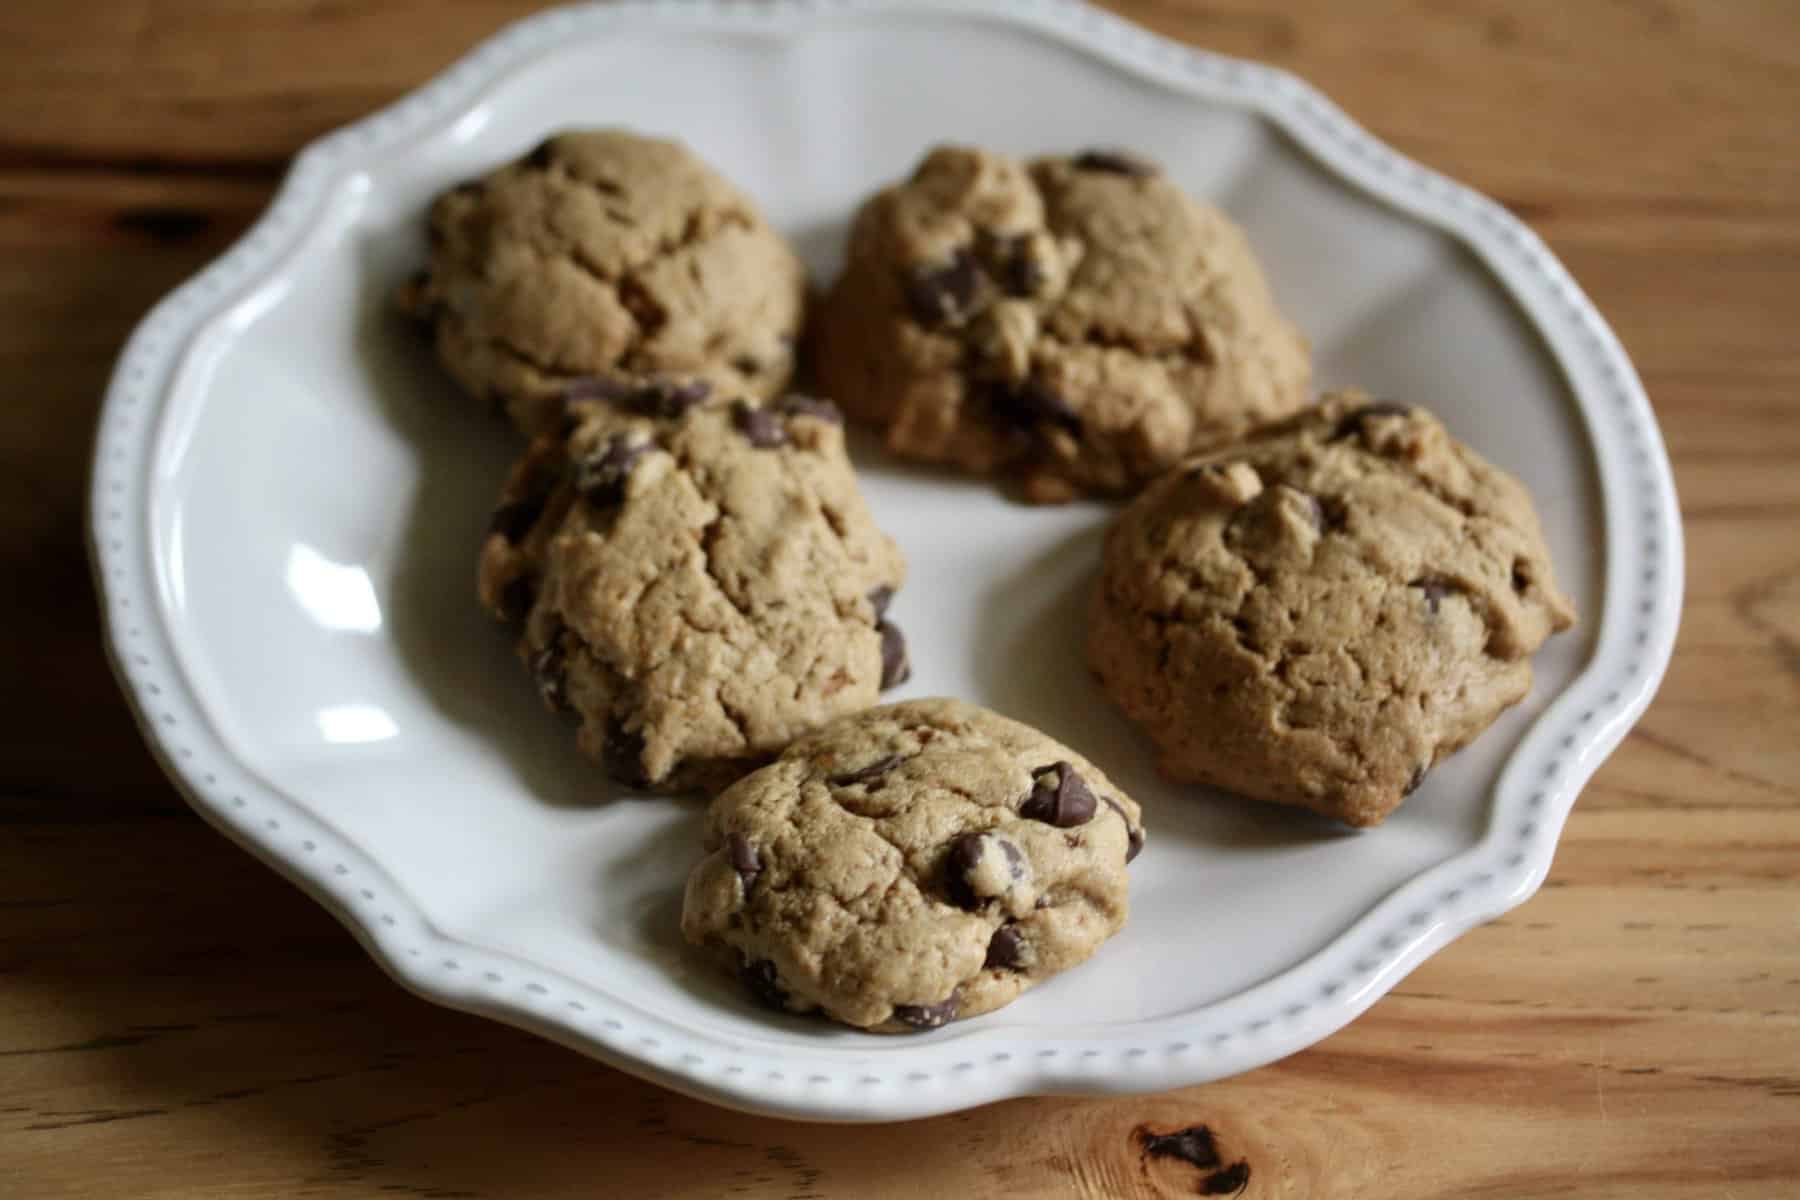 A plate of gluten-free tahini chocolate chip cookies.